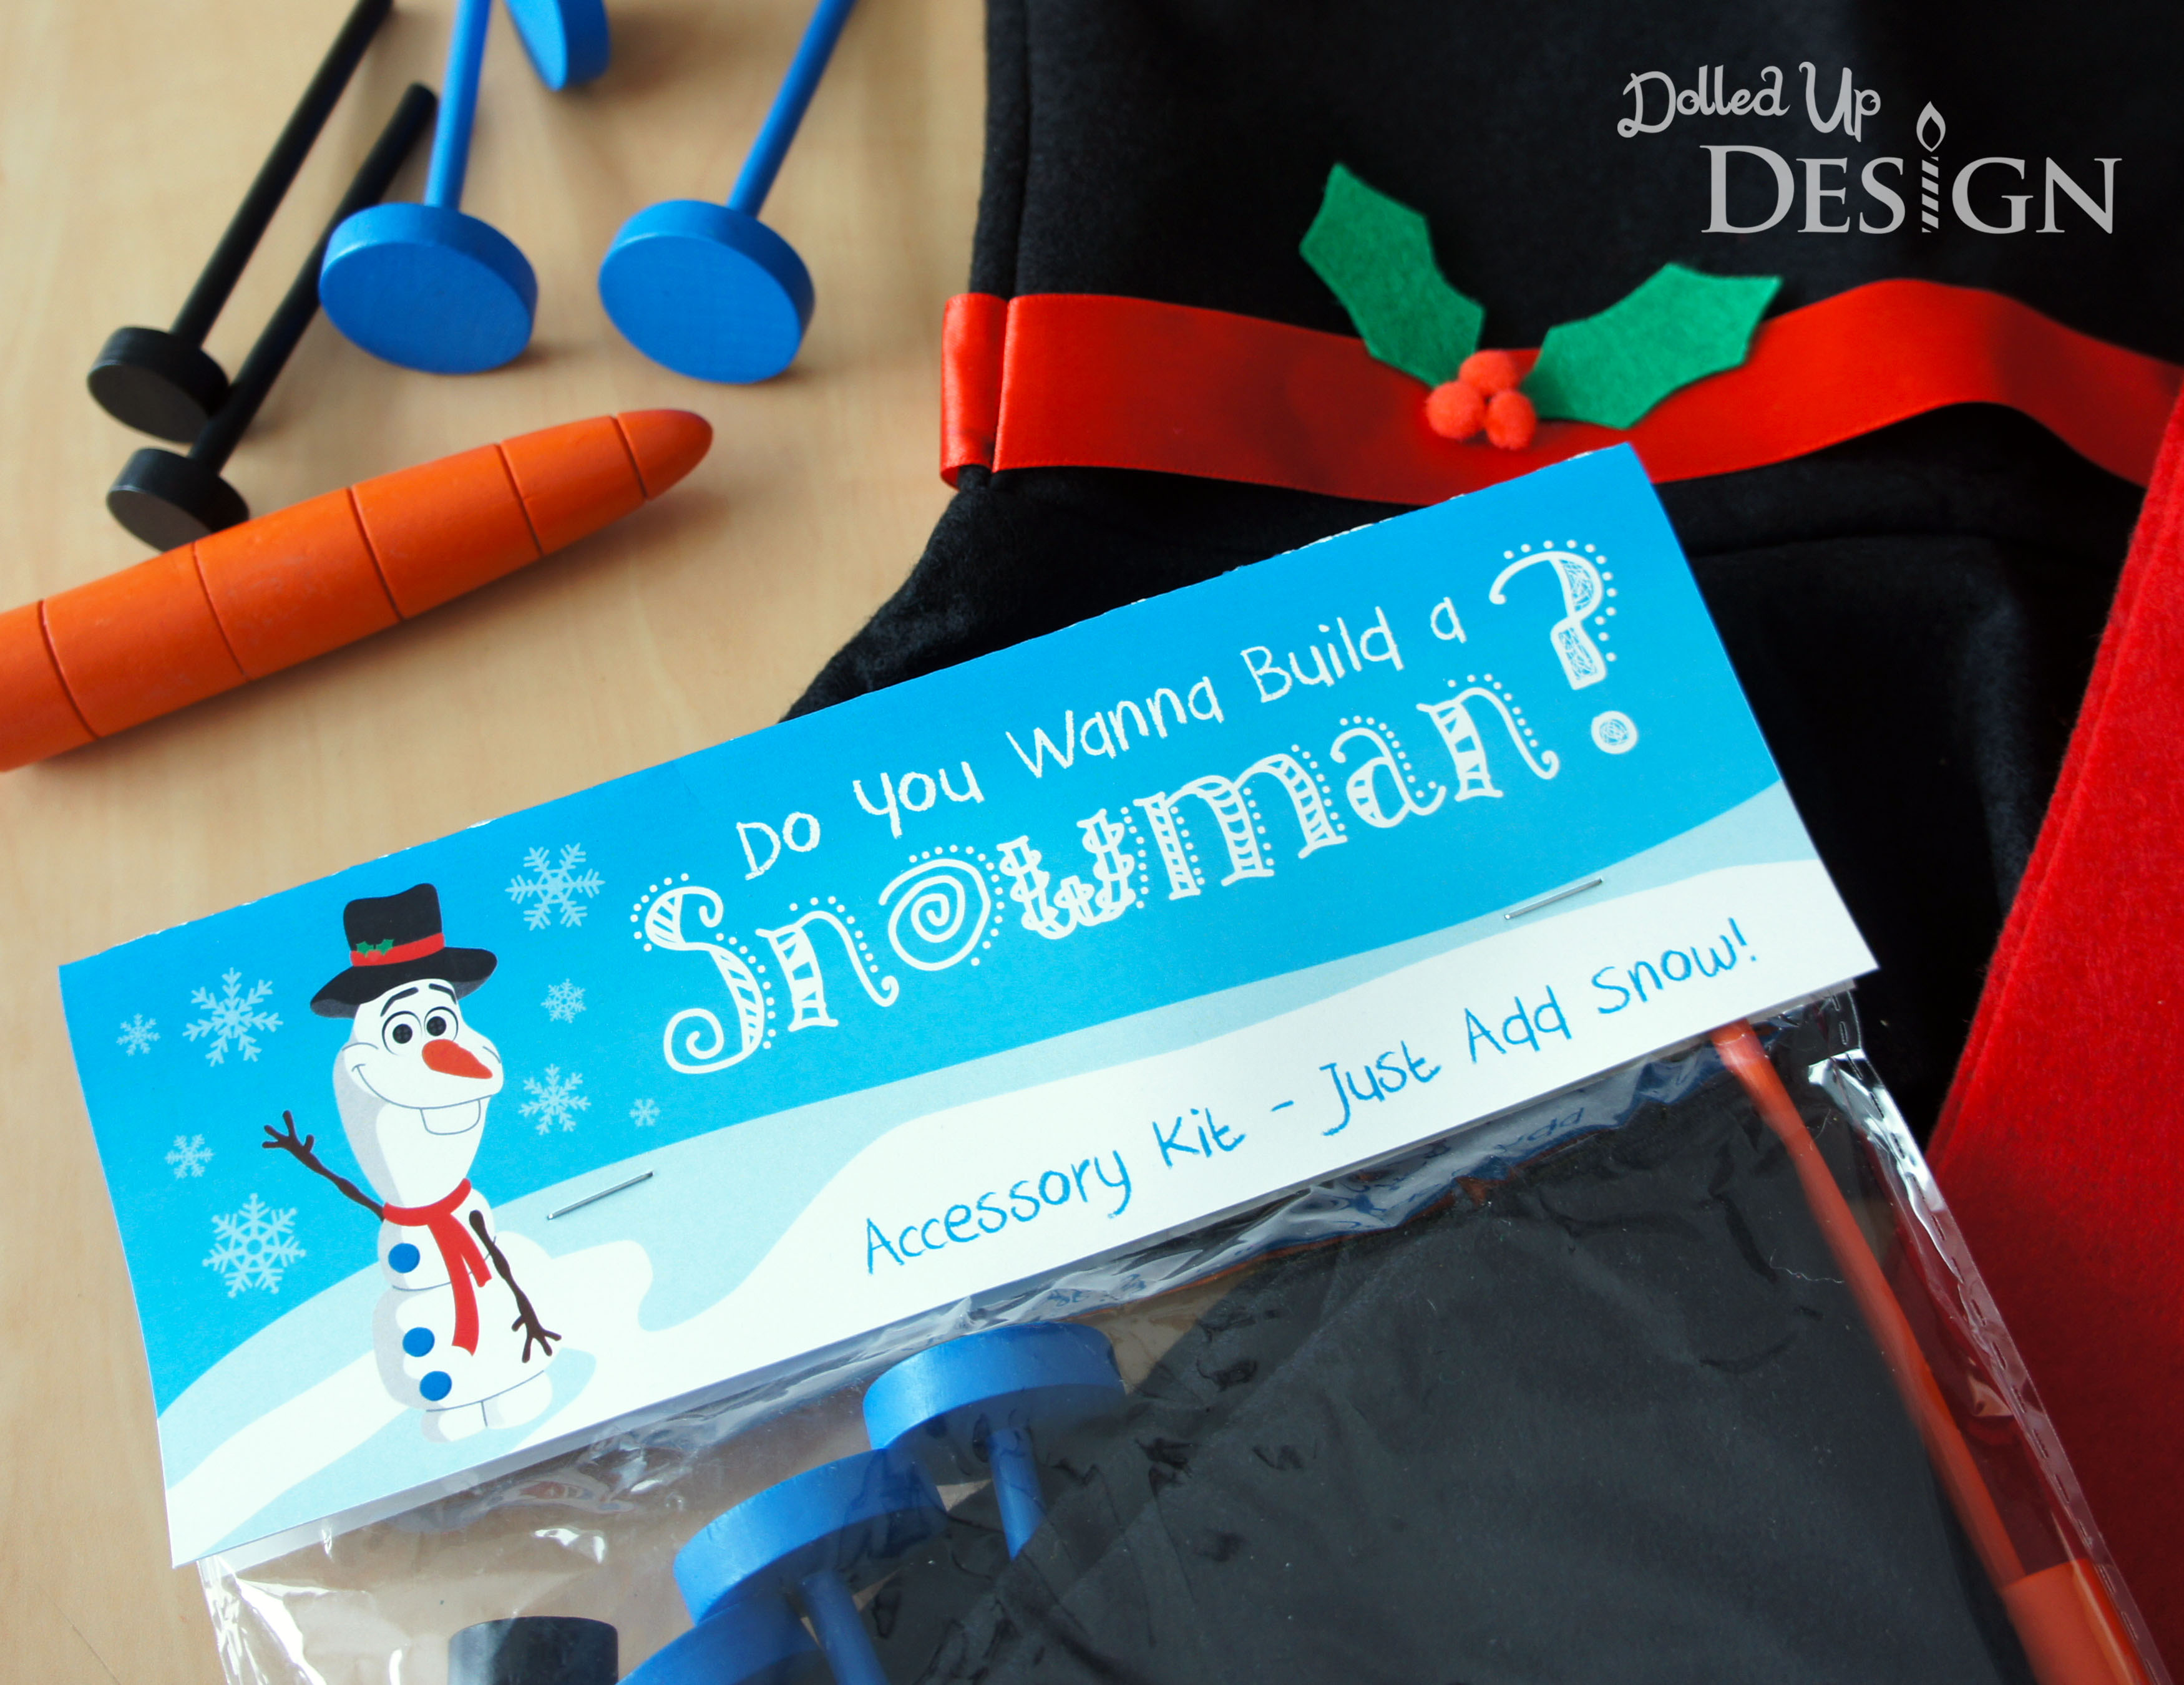 Free Printable Do You Want to Build a Snowman Craft Kits